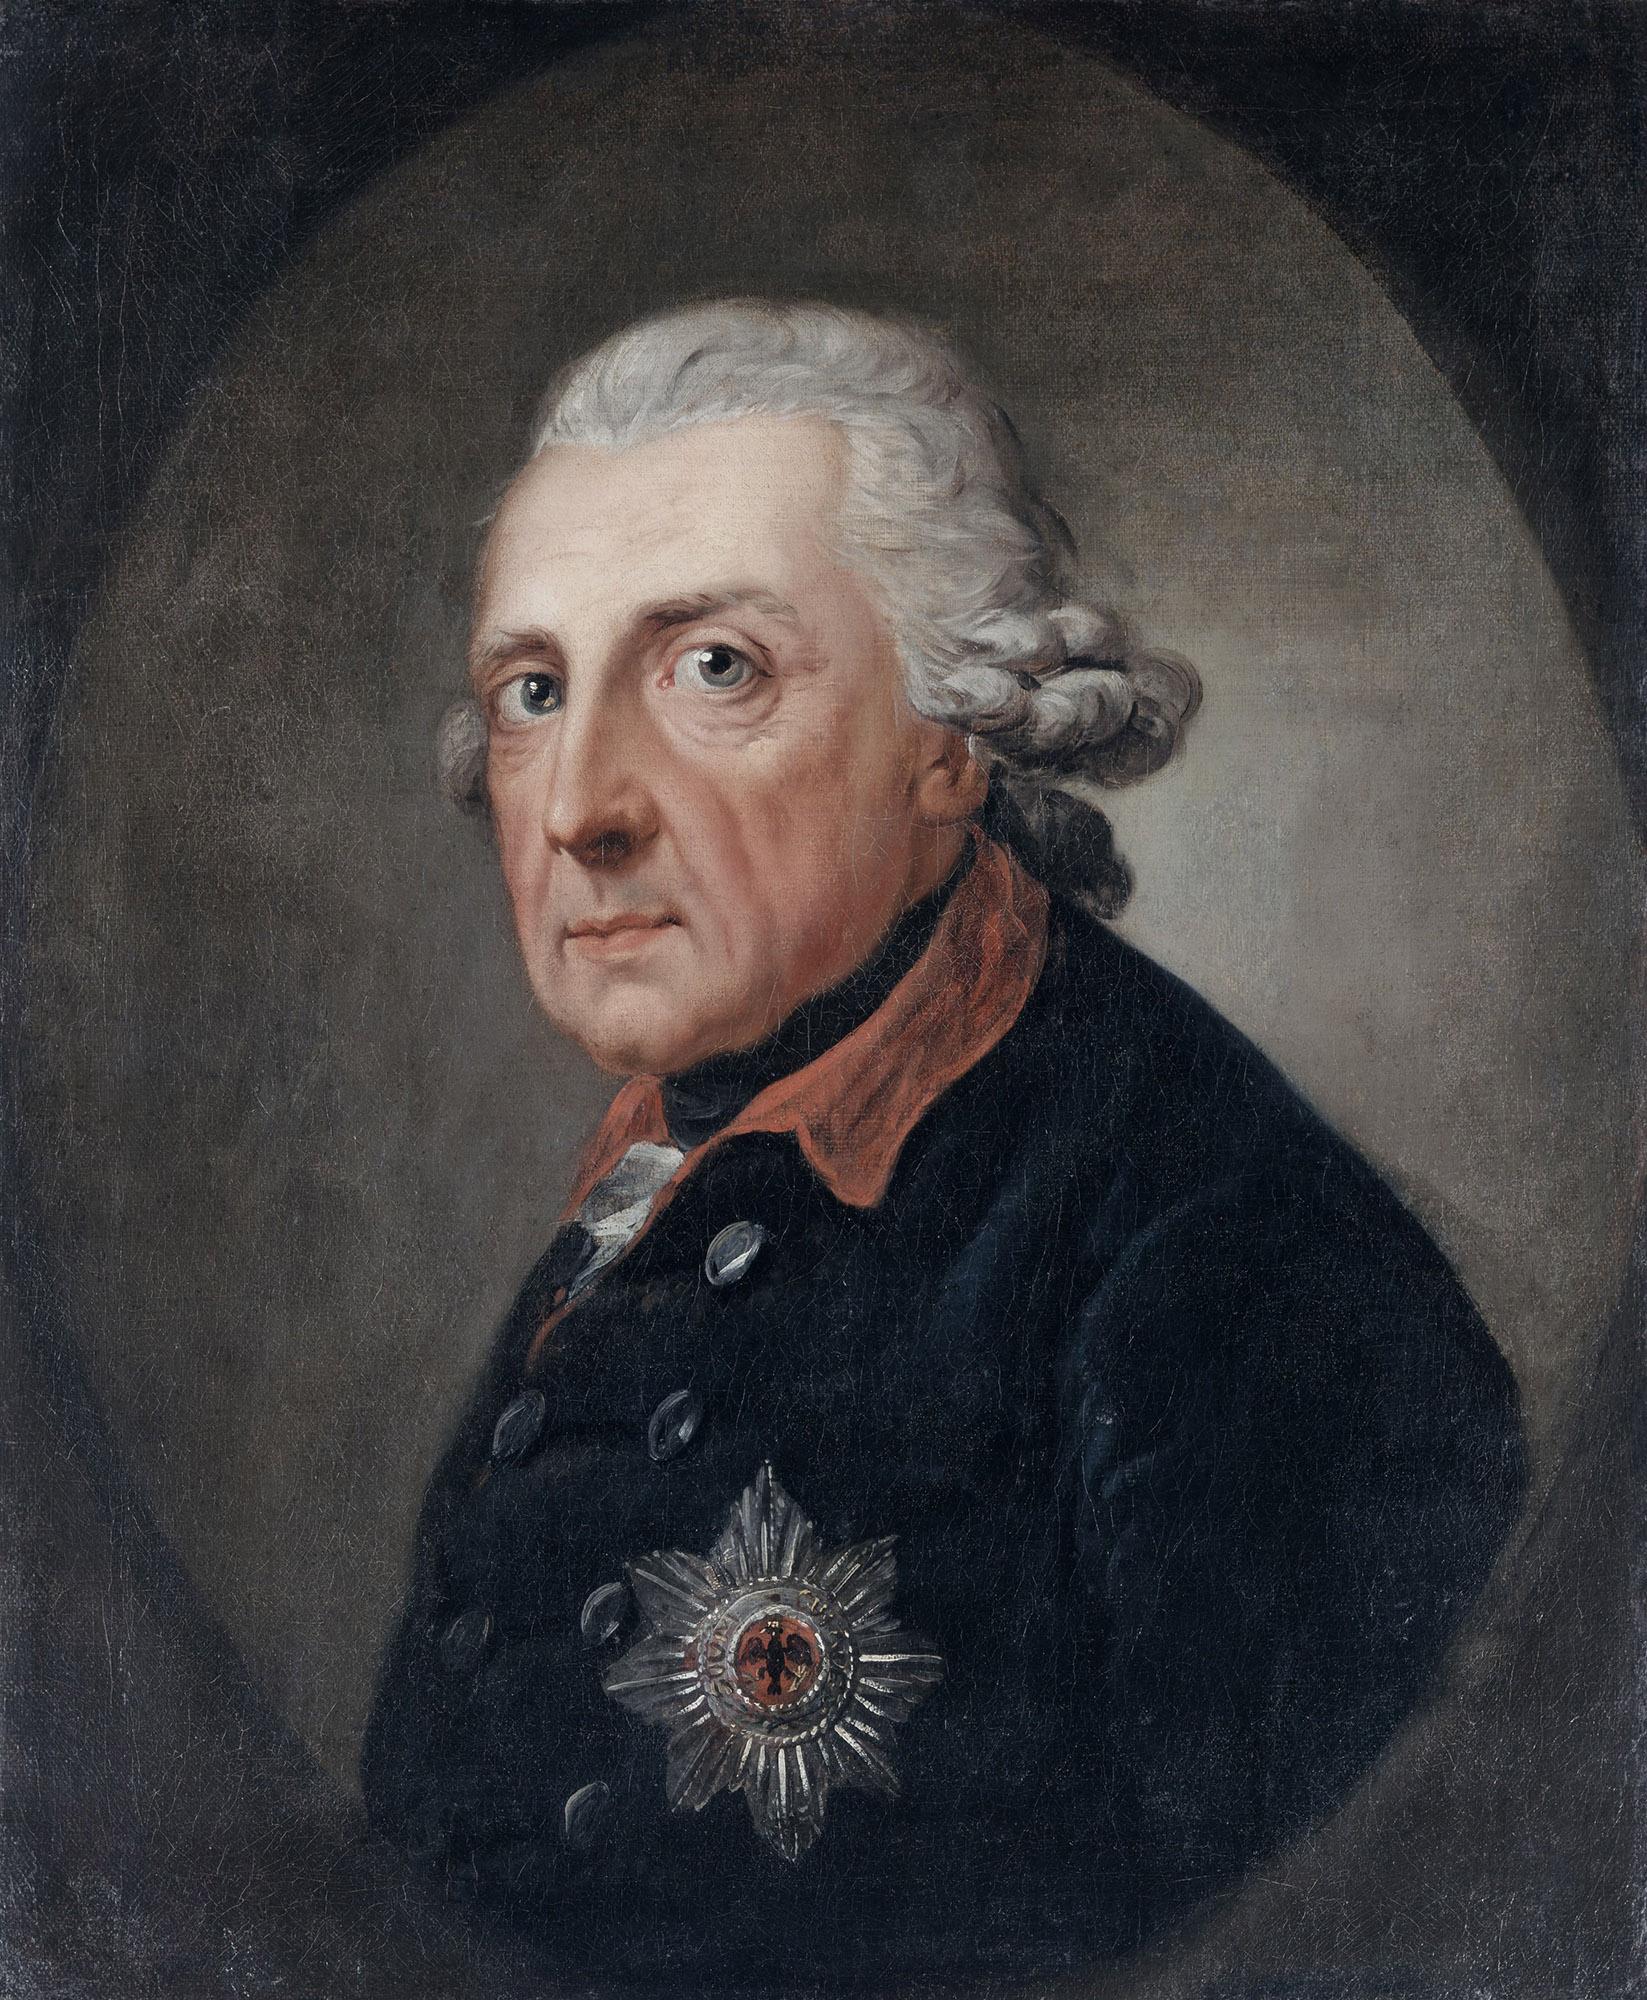 Frederick the Great. – © J. P. Andres / SPSG, Sanssouci Palace, Frederick the Great 1781 by Anton Graff